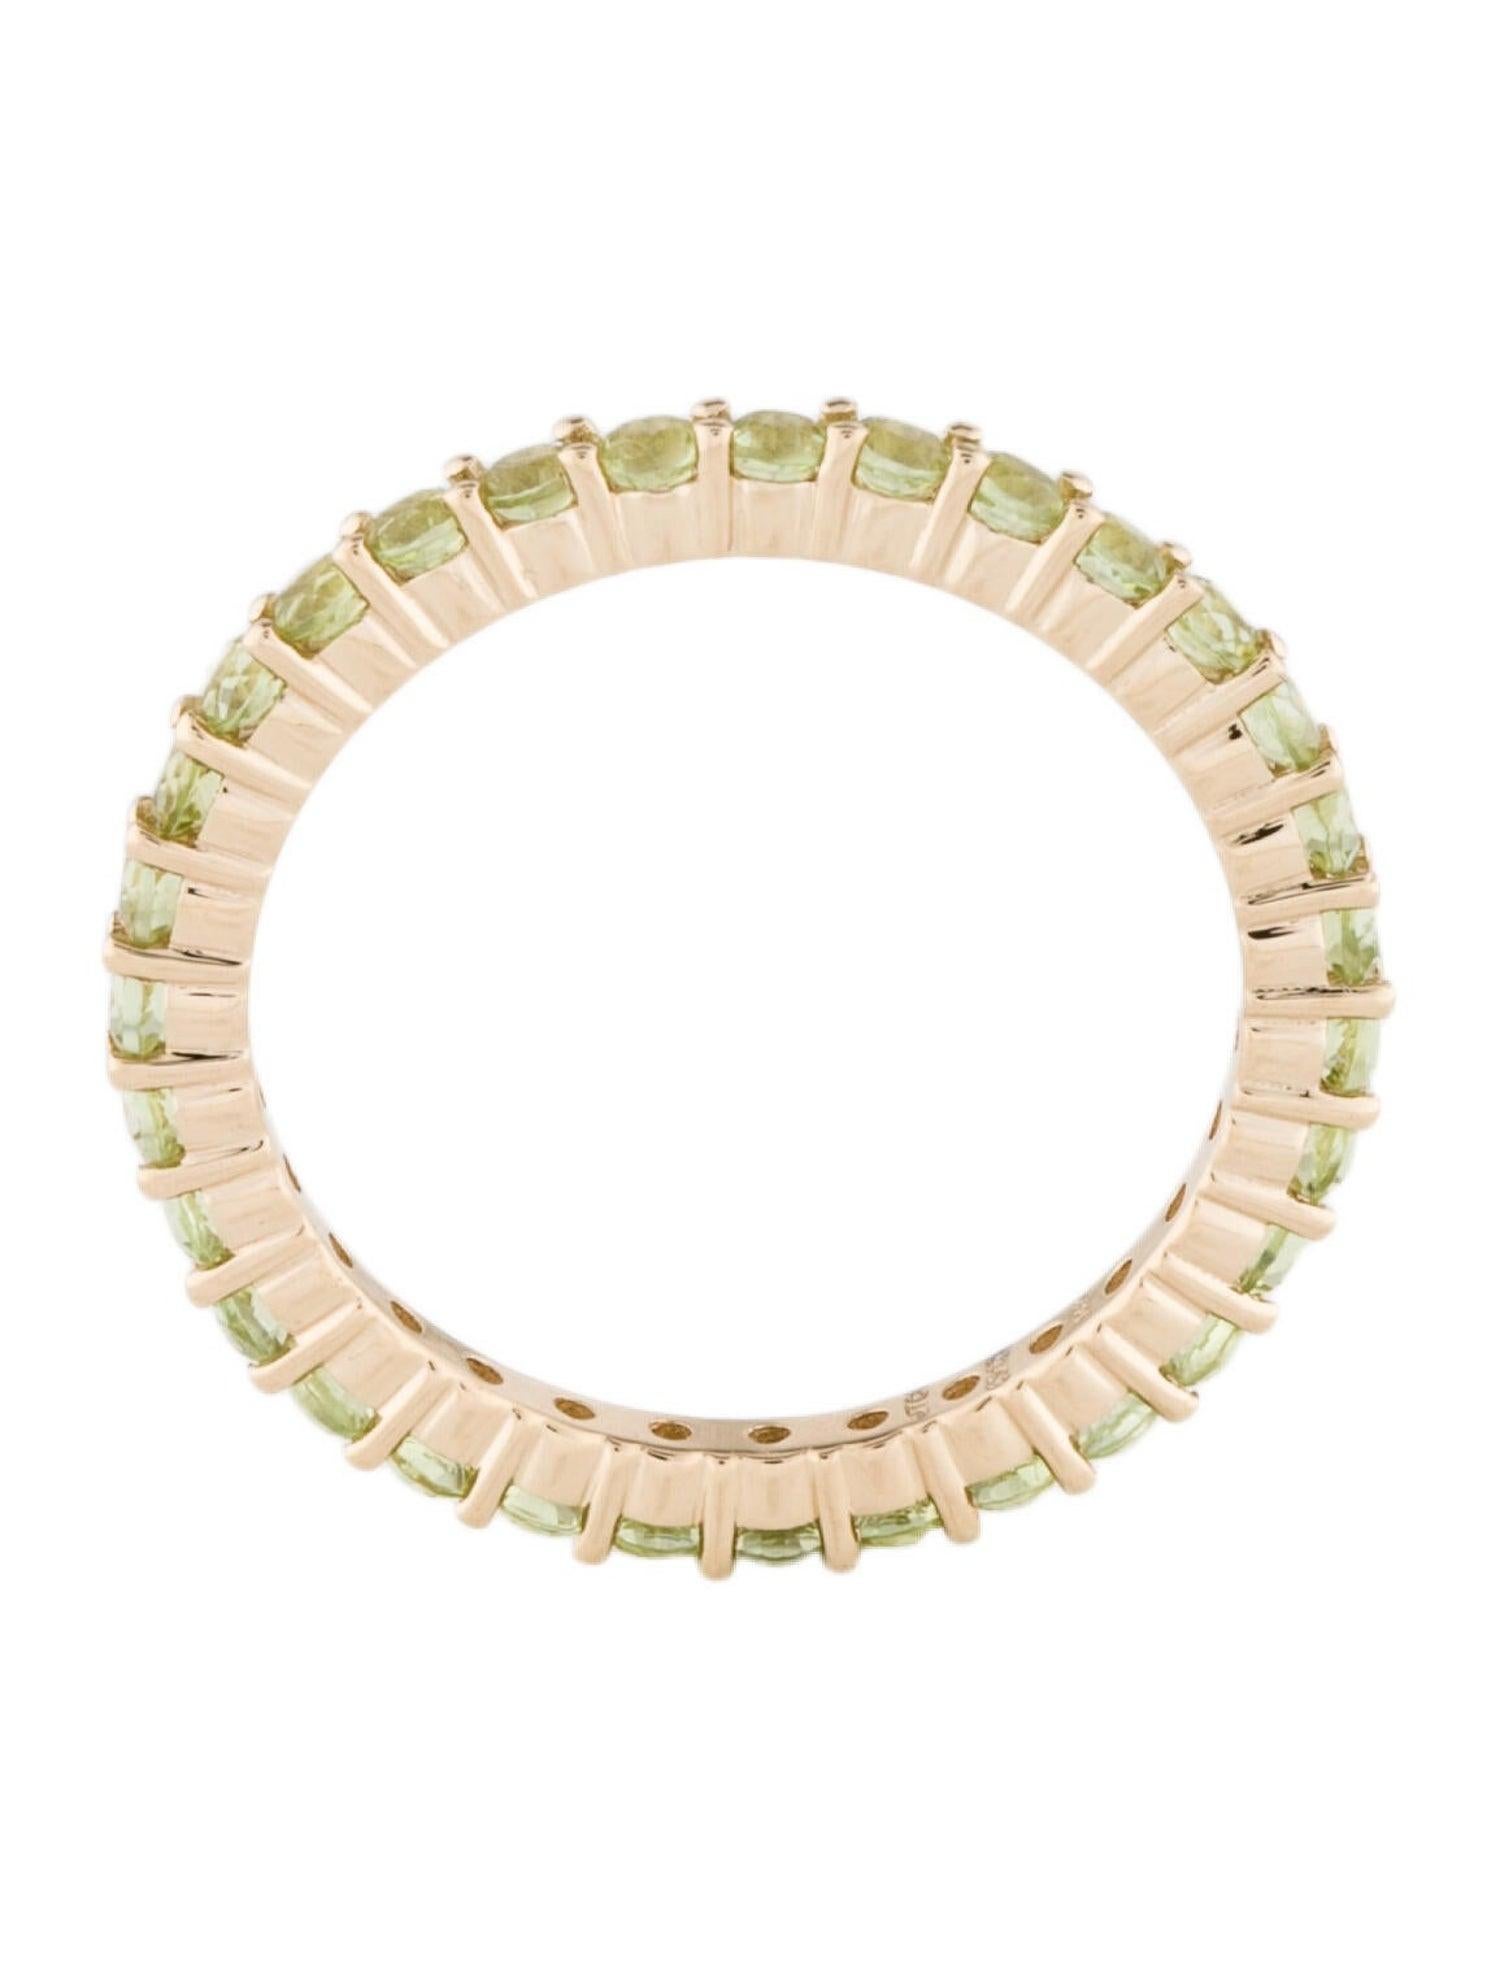 Chic 14K Peridot Eternity Band Ring, Size 7 - Timeless Statement Jewelry Pieces Neuf - En vente à Holtsville, NY